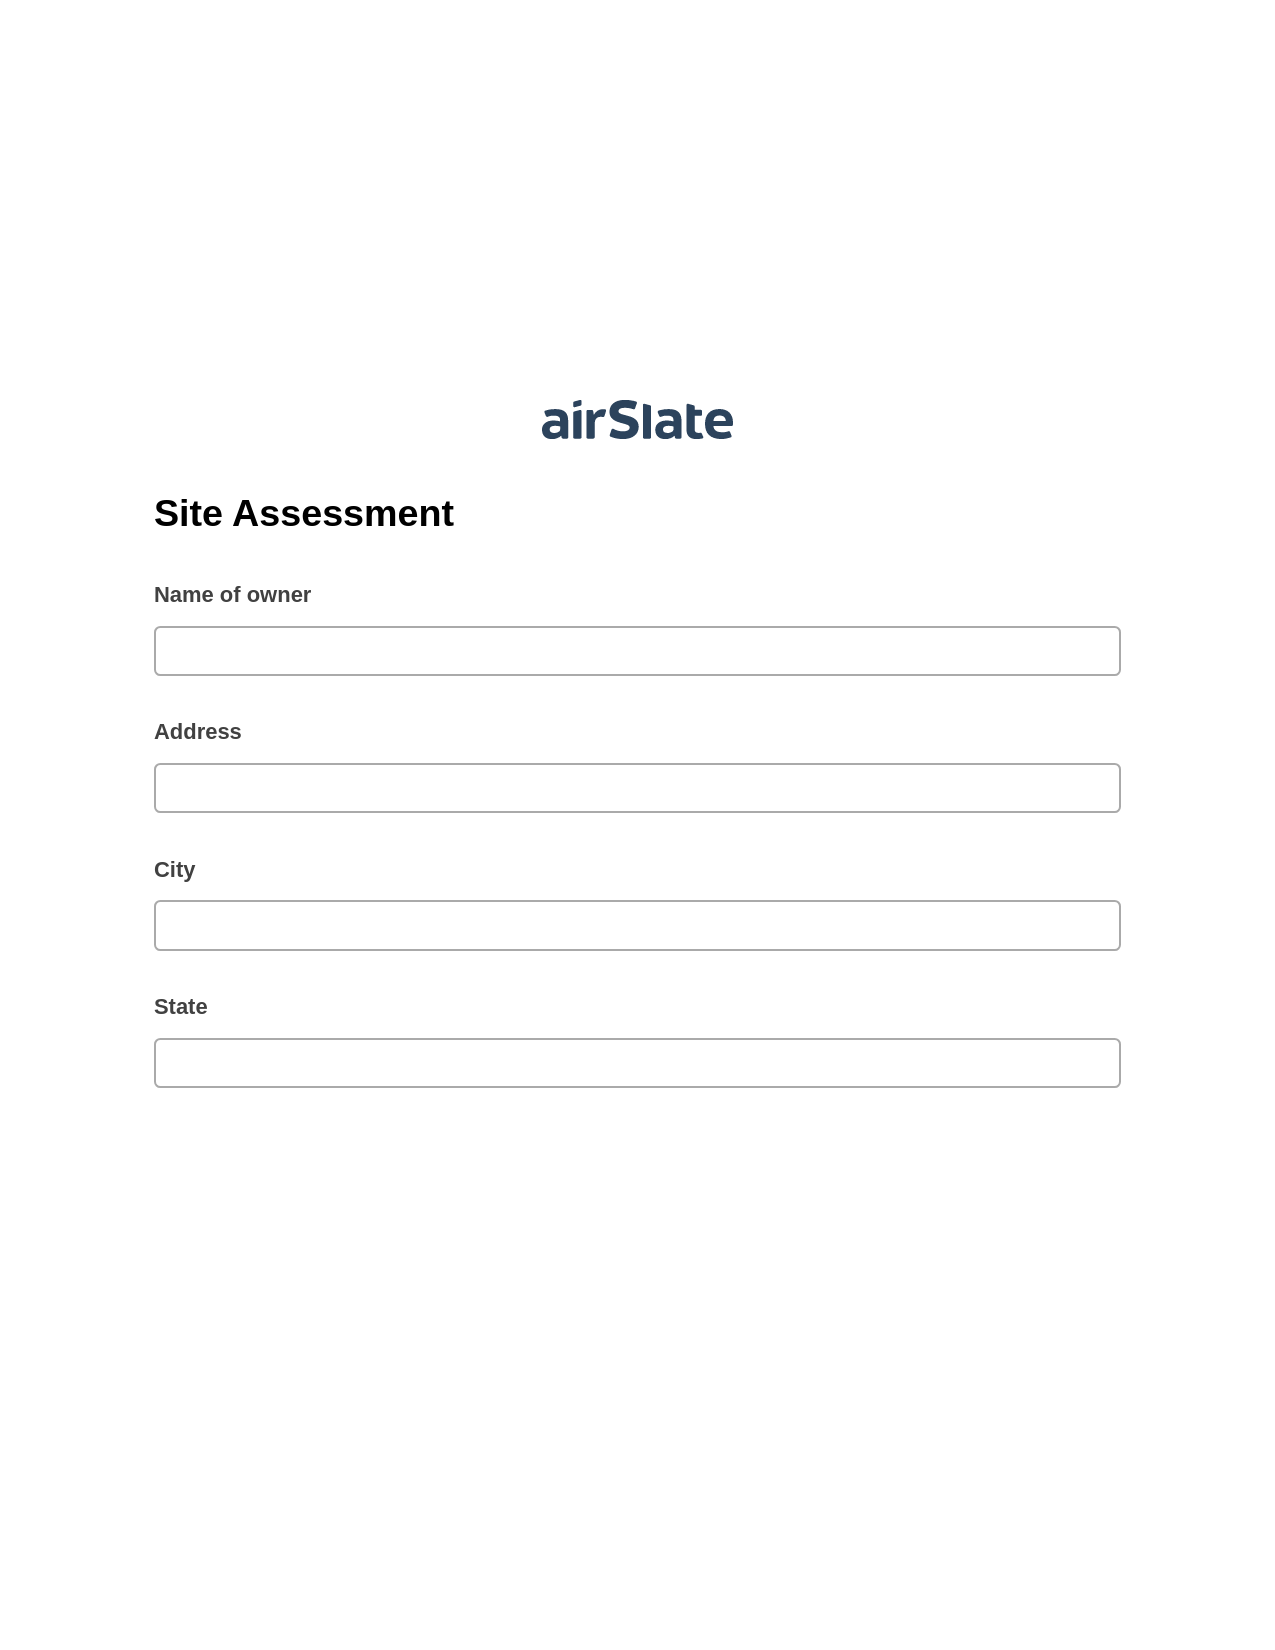 Site Assessment Pre-fill from CSV File Dropdown Options Bot, Send a Slate to MS Dynamics 365 Contact Bot, Export to Salesforce Bot